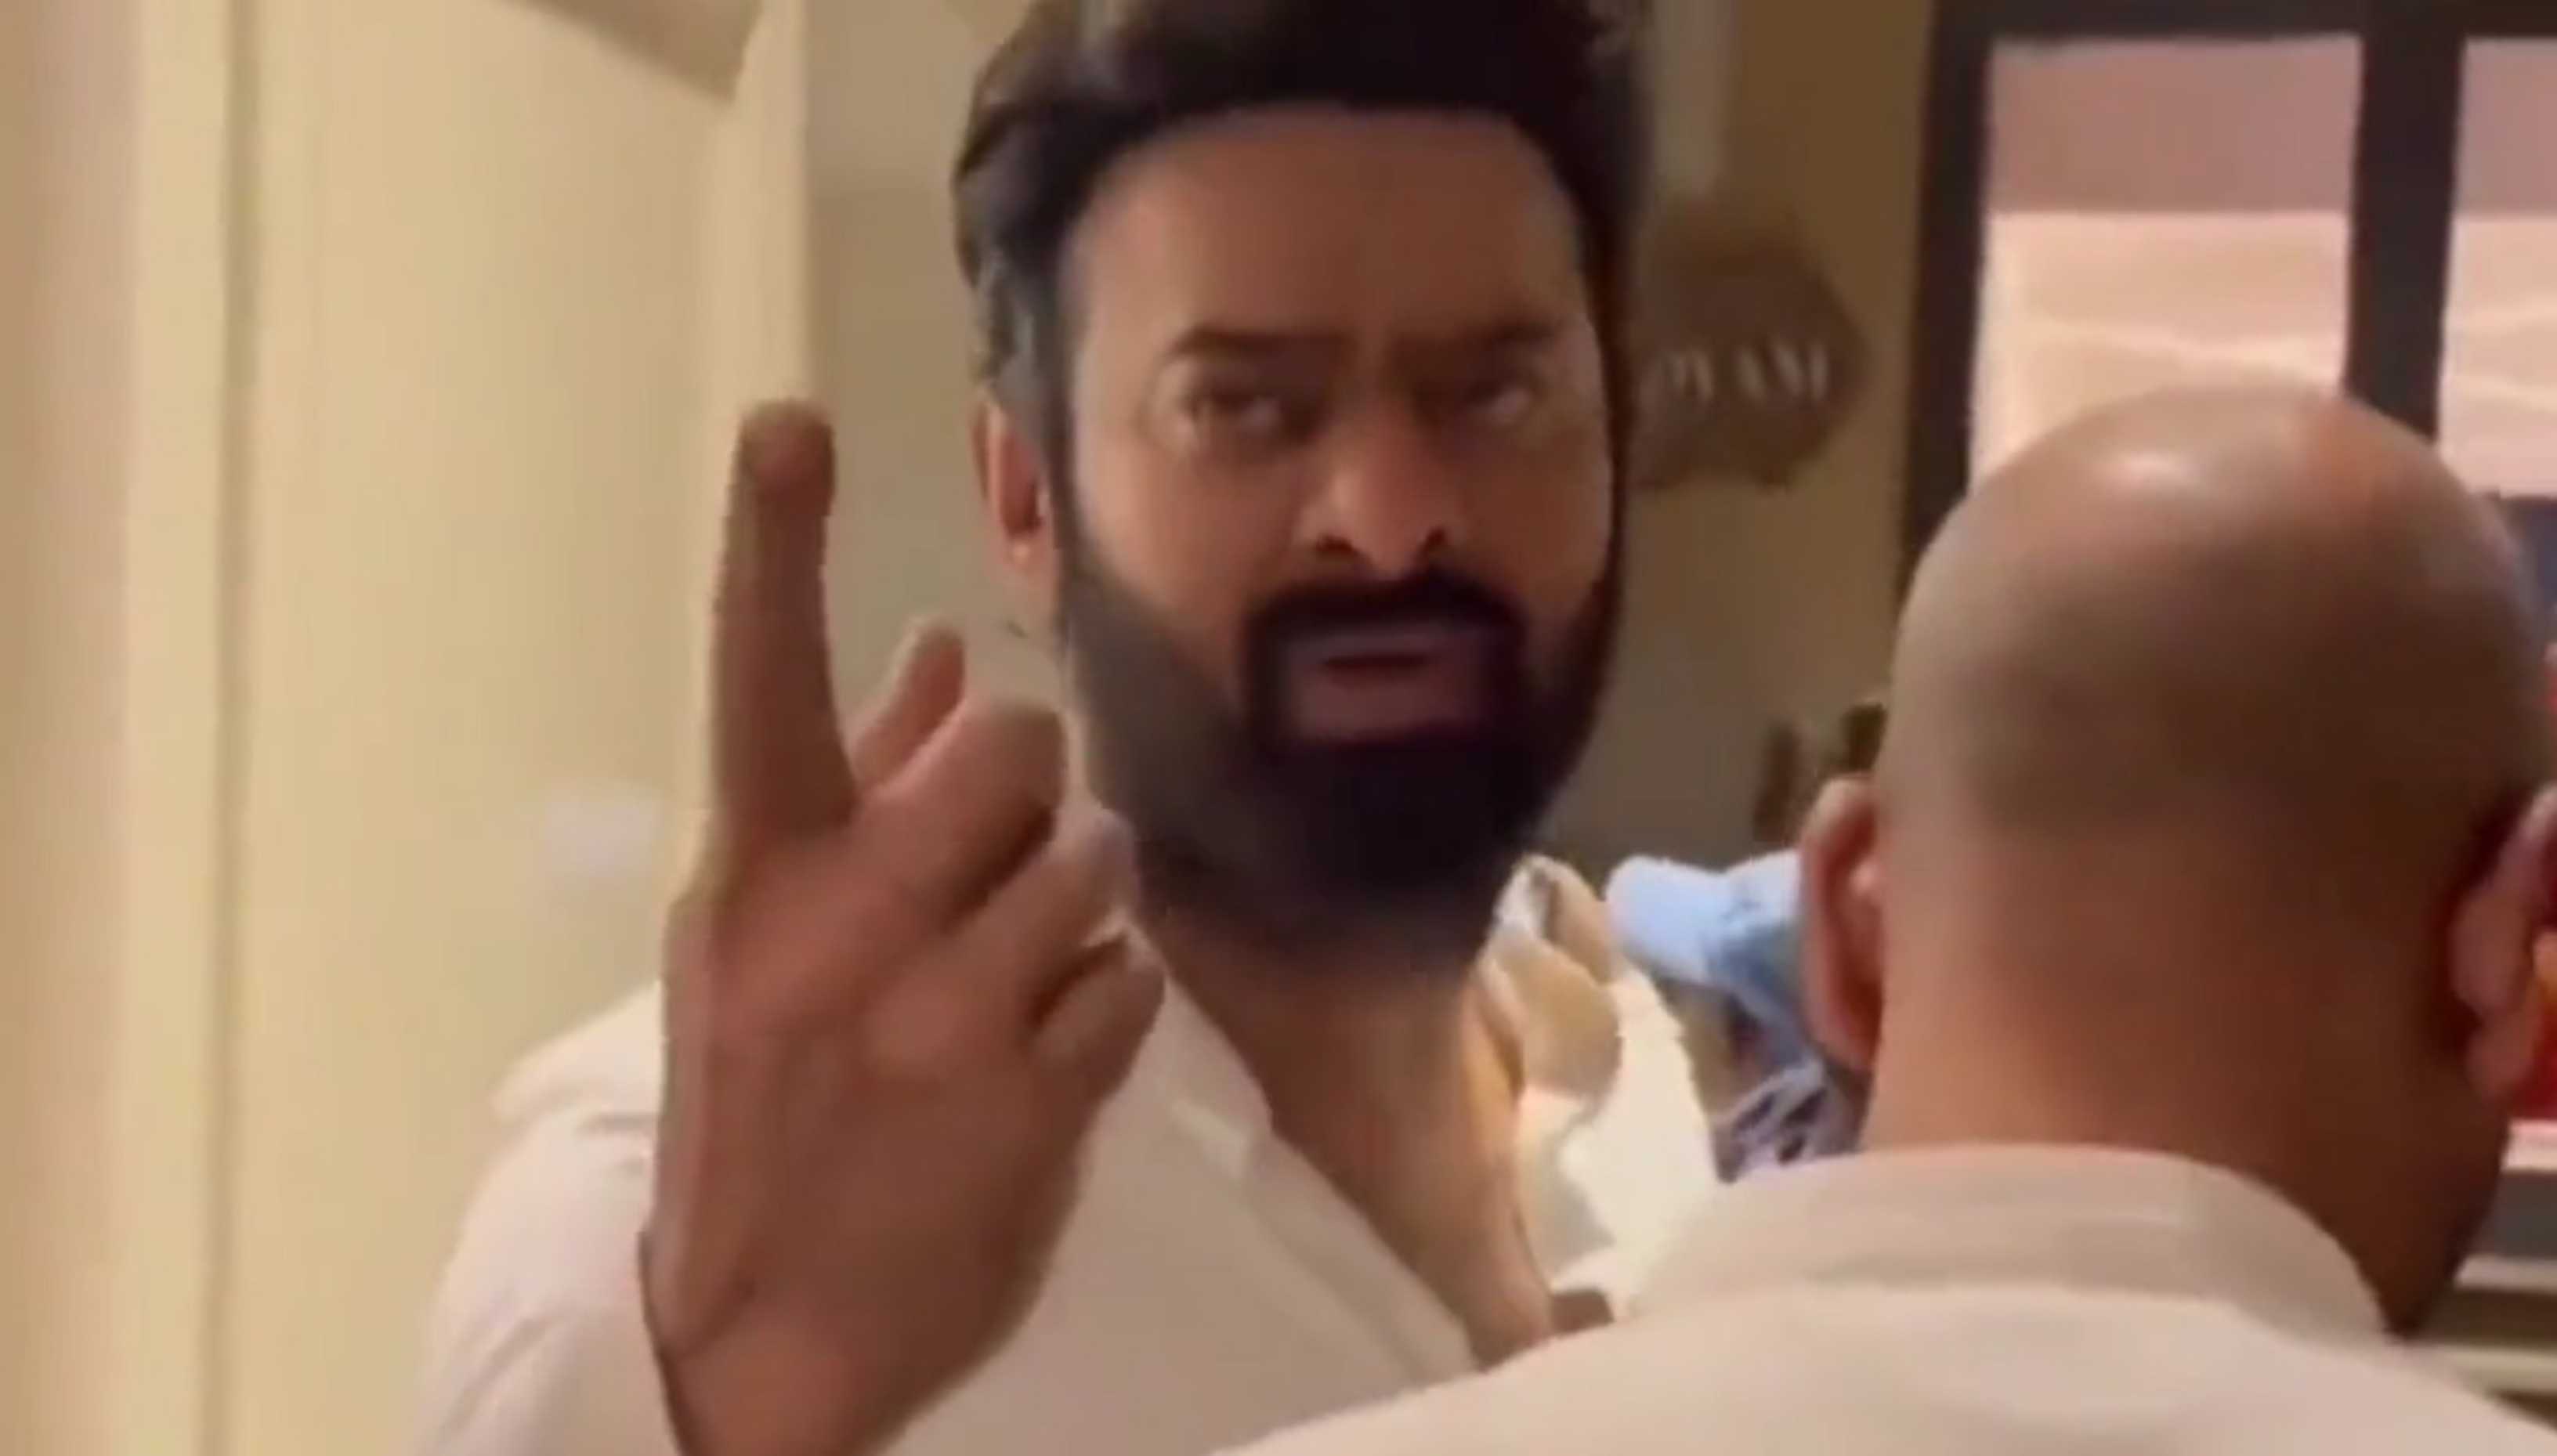 Was Prabhas unhappy with Adipurush teaser like many of his fans? This viral video suggests so